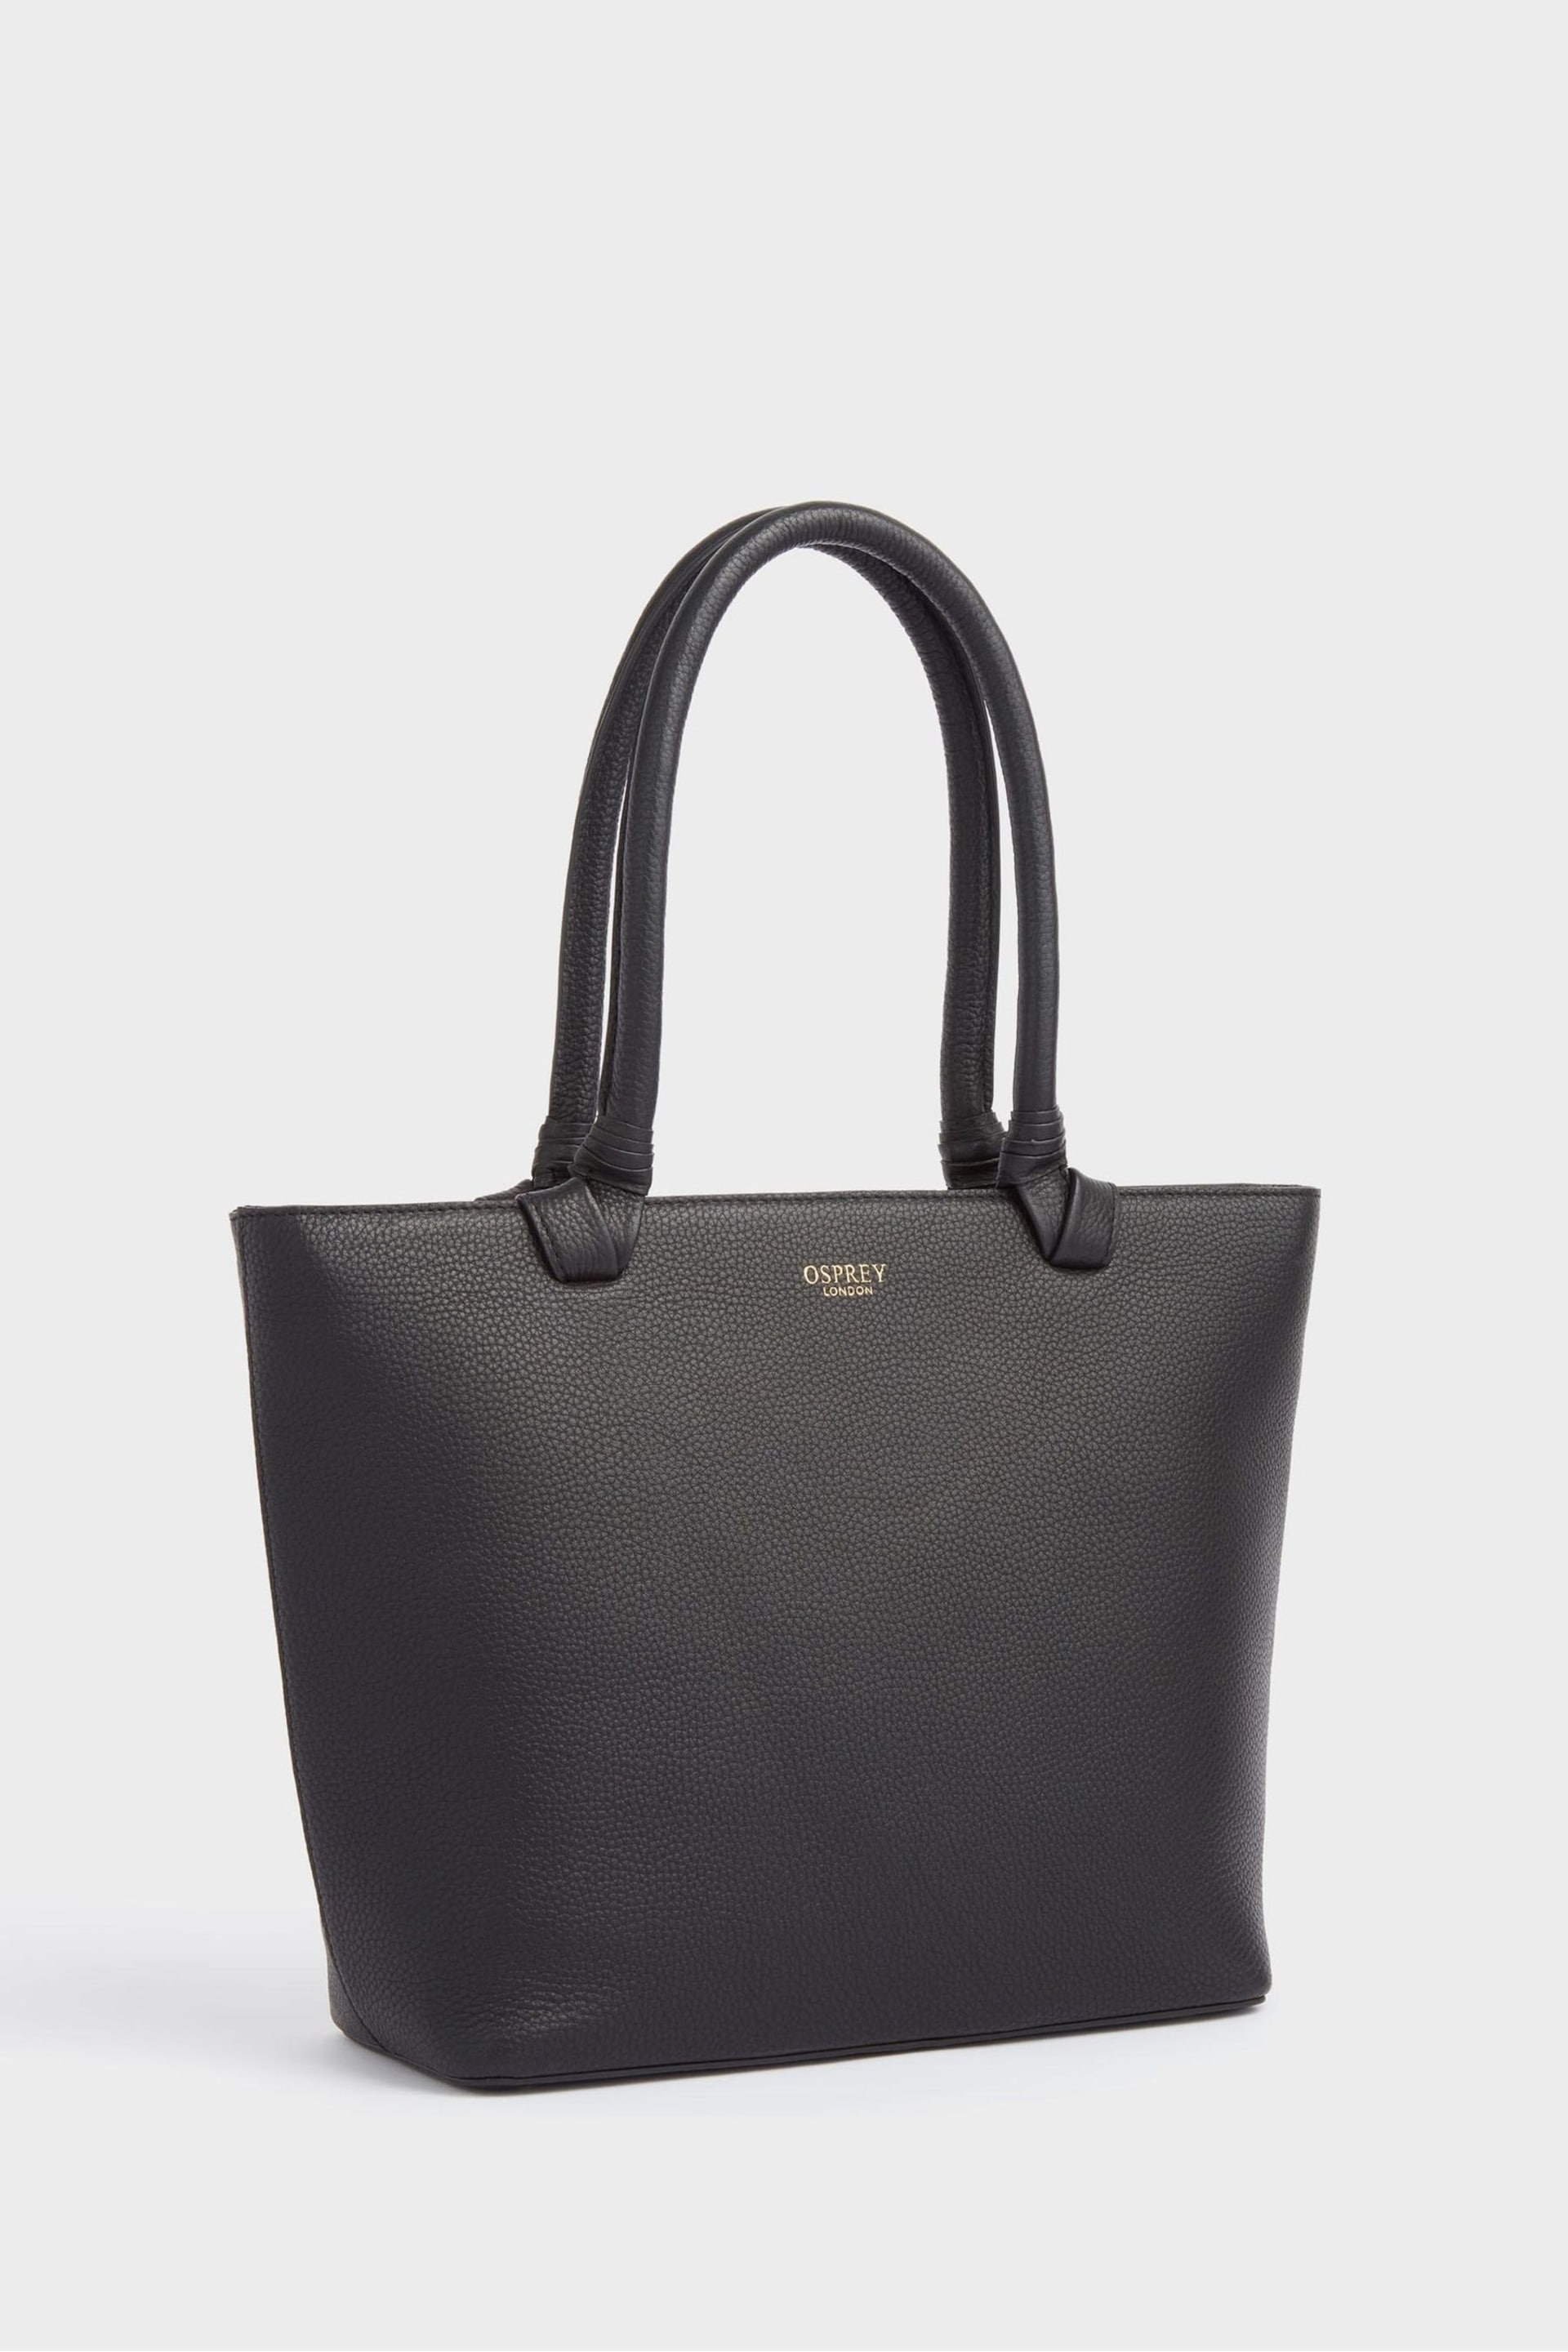 OSPREY LONDON Tan The Collier Leather Shoulder Tote Bag - Image 2 of 4